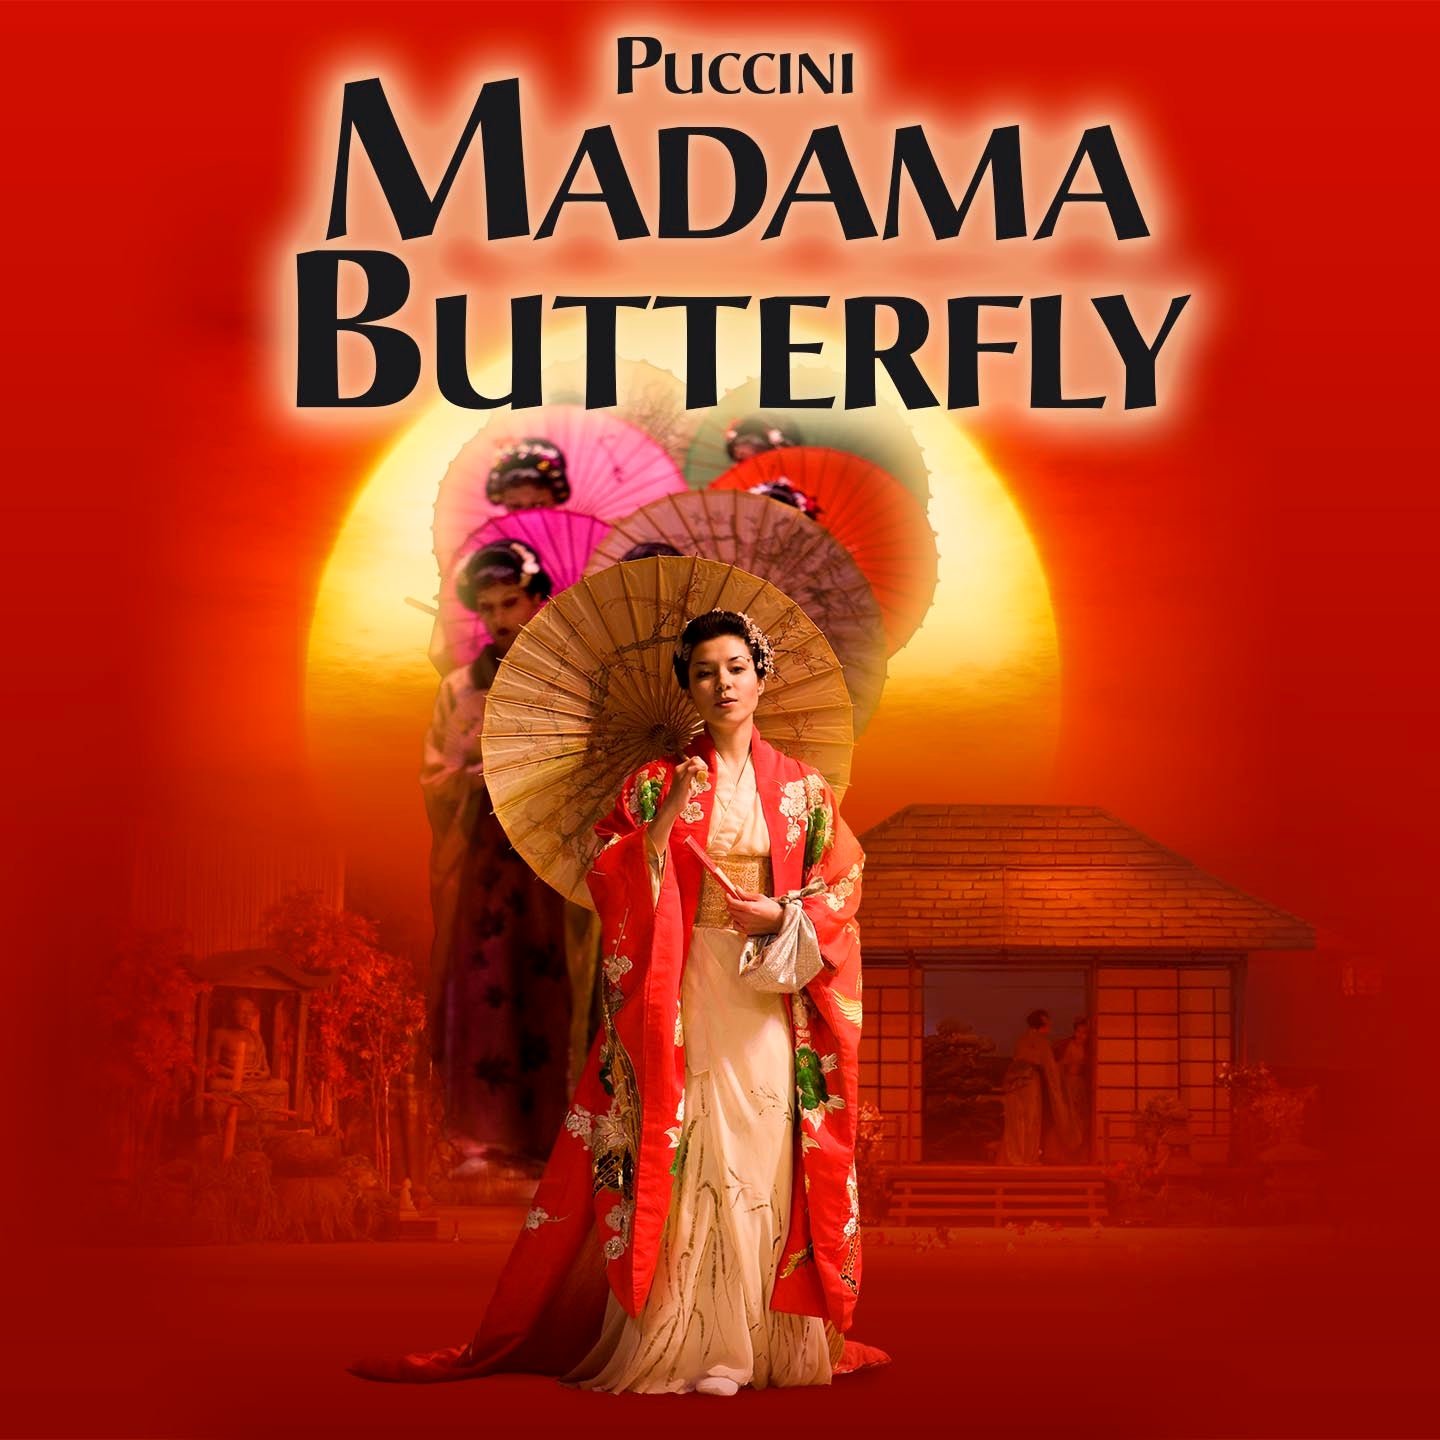 Image name Ellen Kents Madama Butterfly at Hull City Hall Hull the 4 image from the post Ellen Kent's - MADAMA BUTTERFLY at Grand Opera House, York, York in Yorkshire.com.